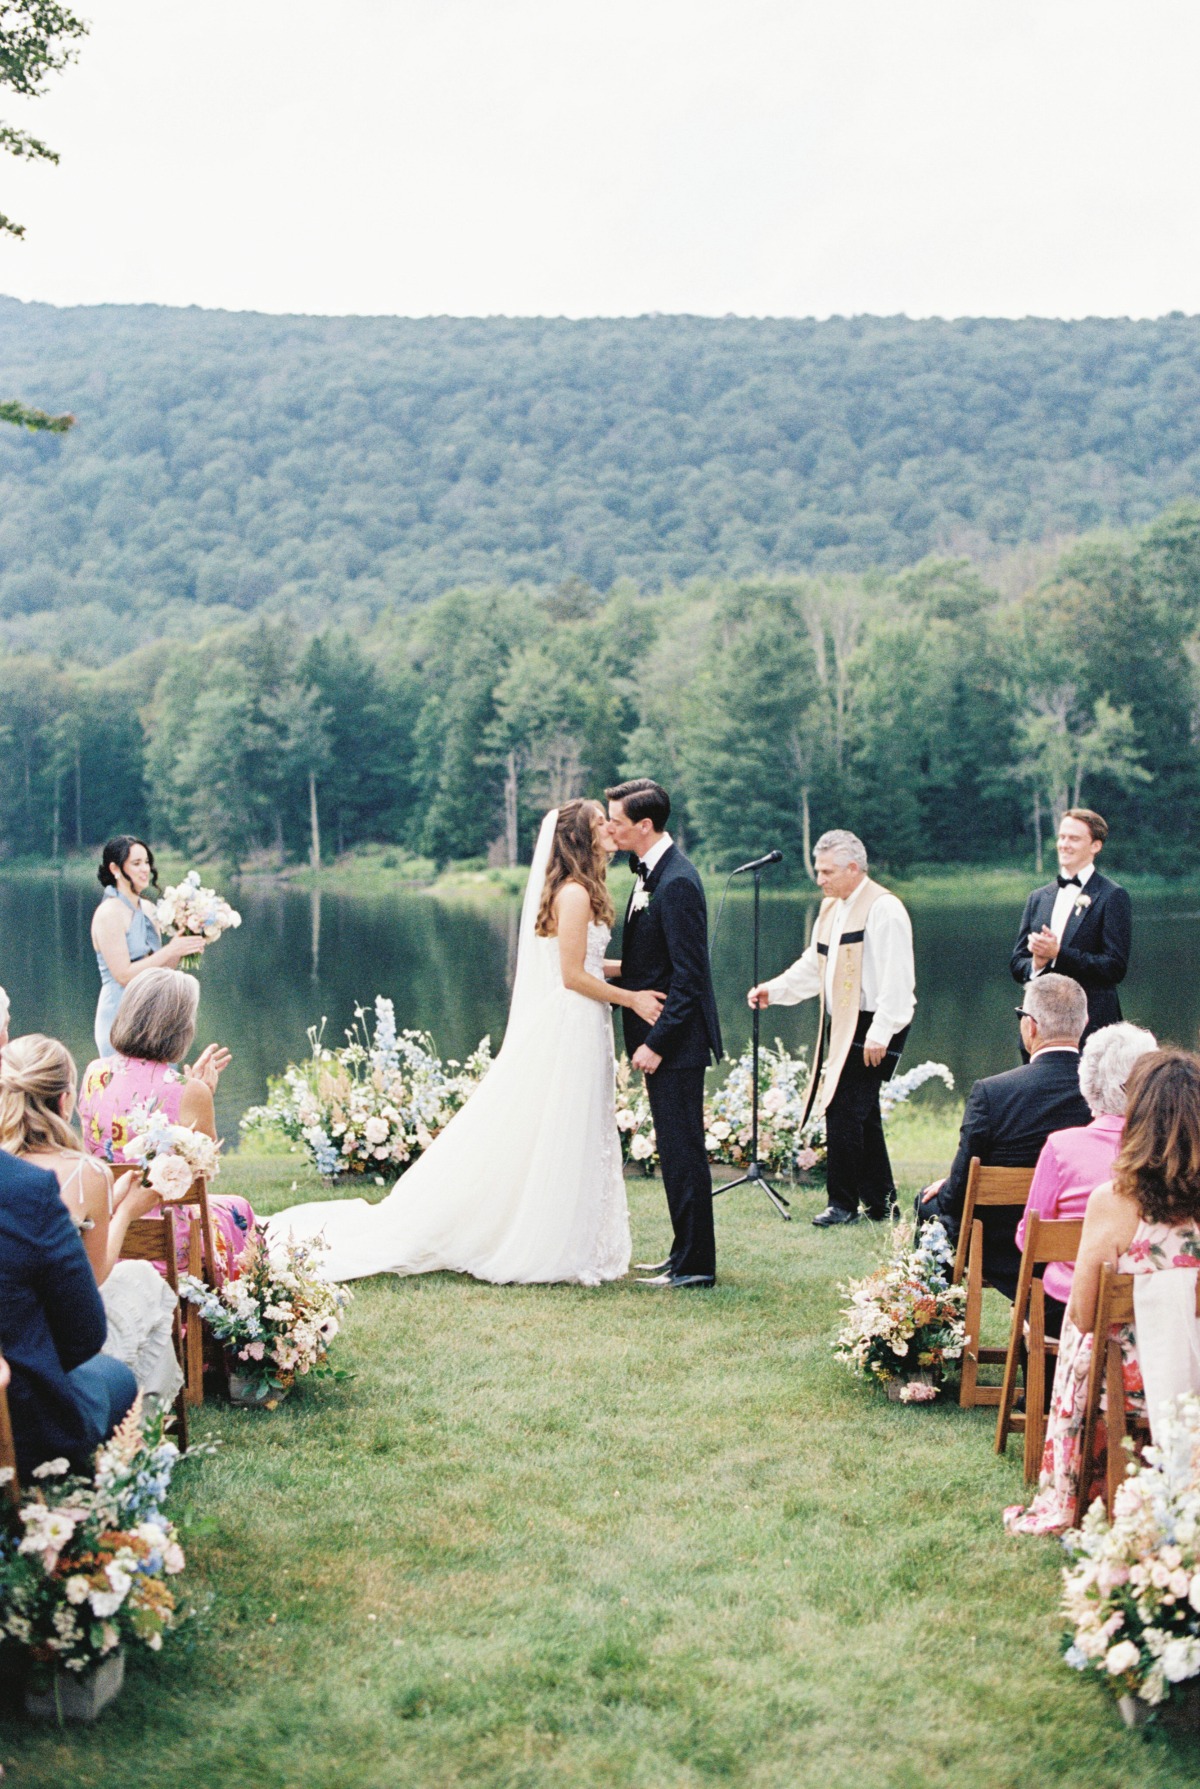 First kiss at lakeside wedding ceremony in the Catskills